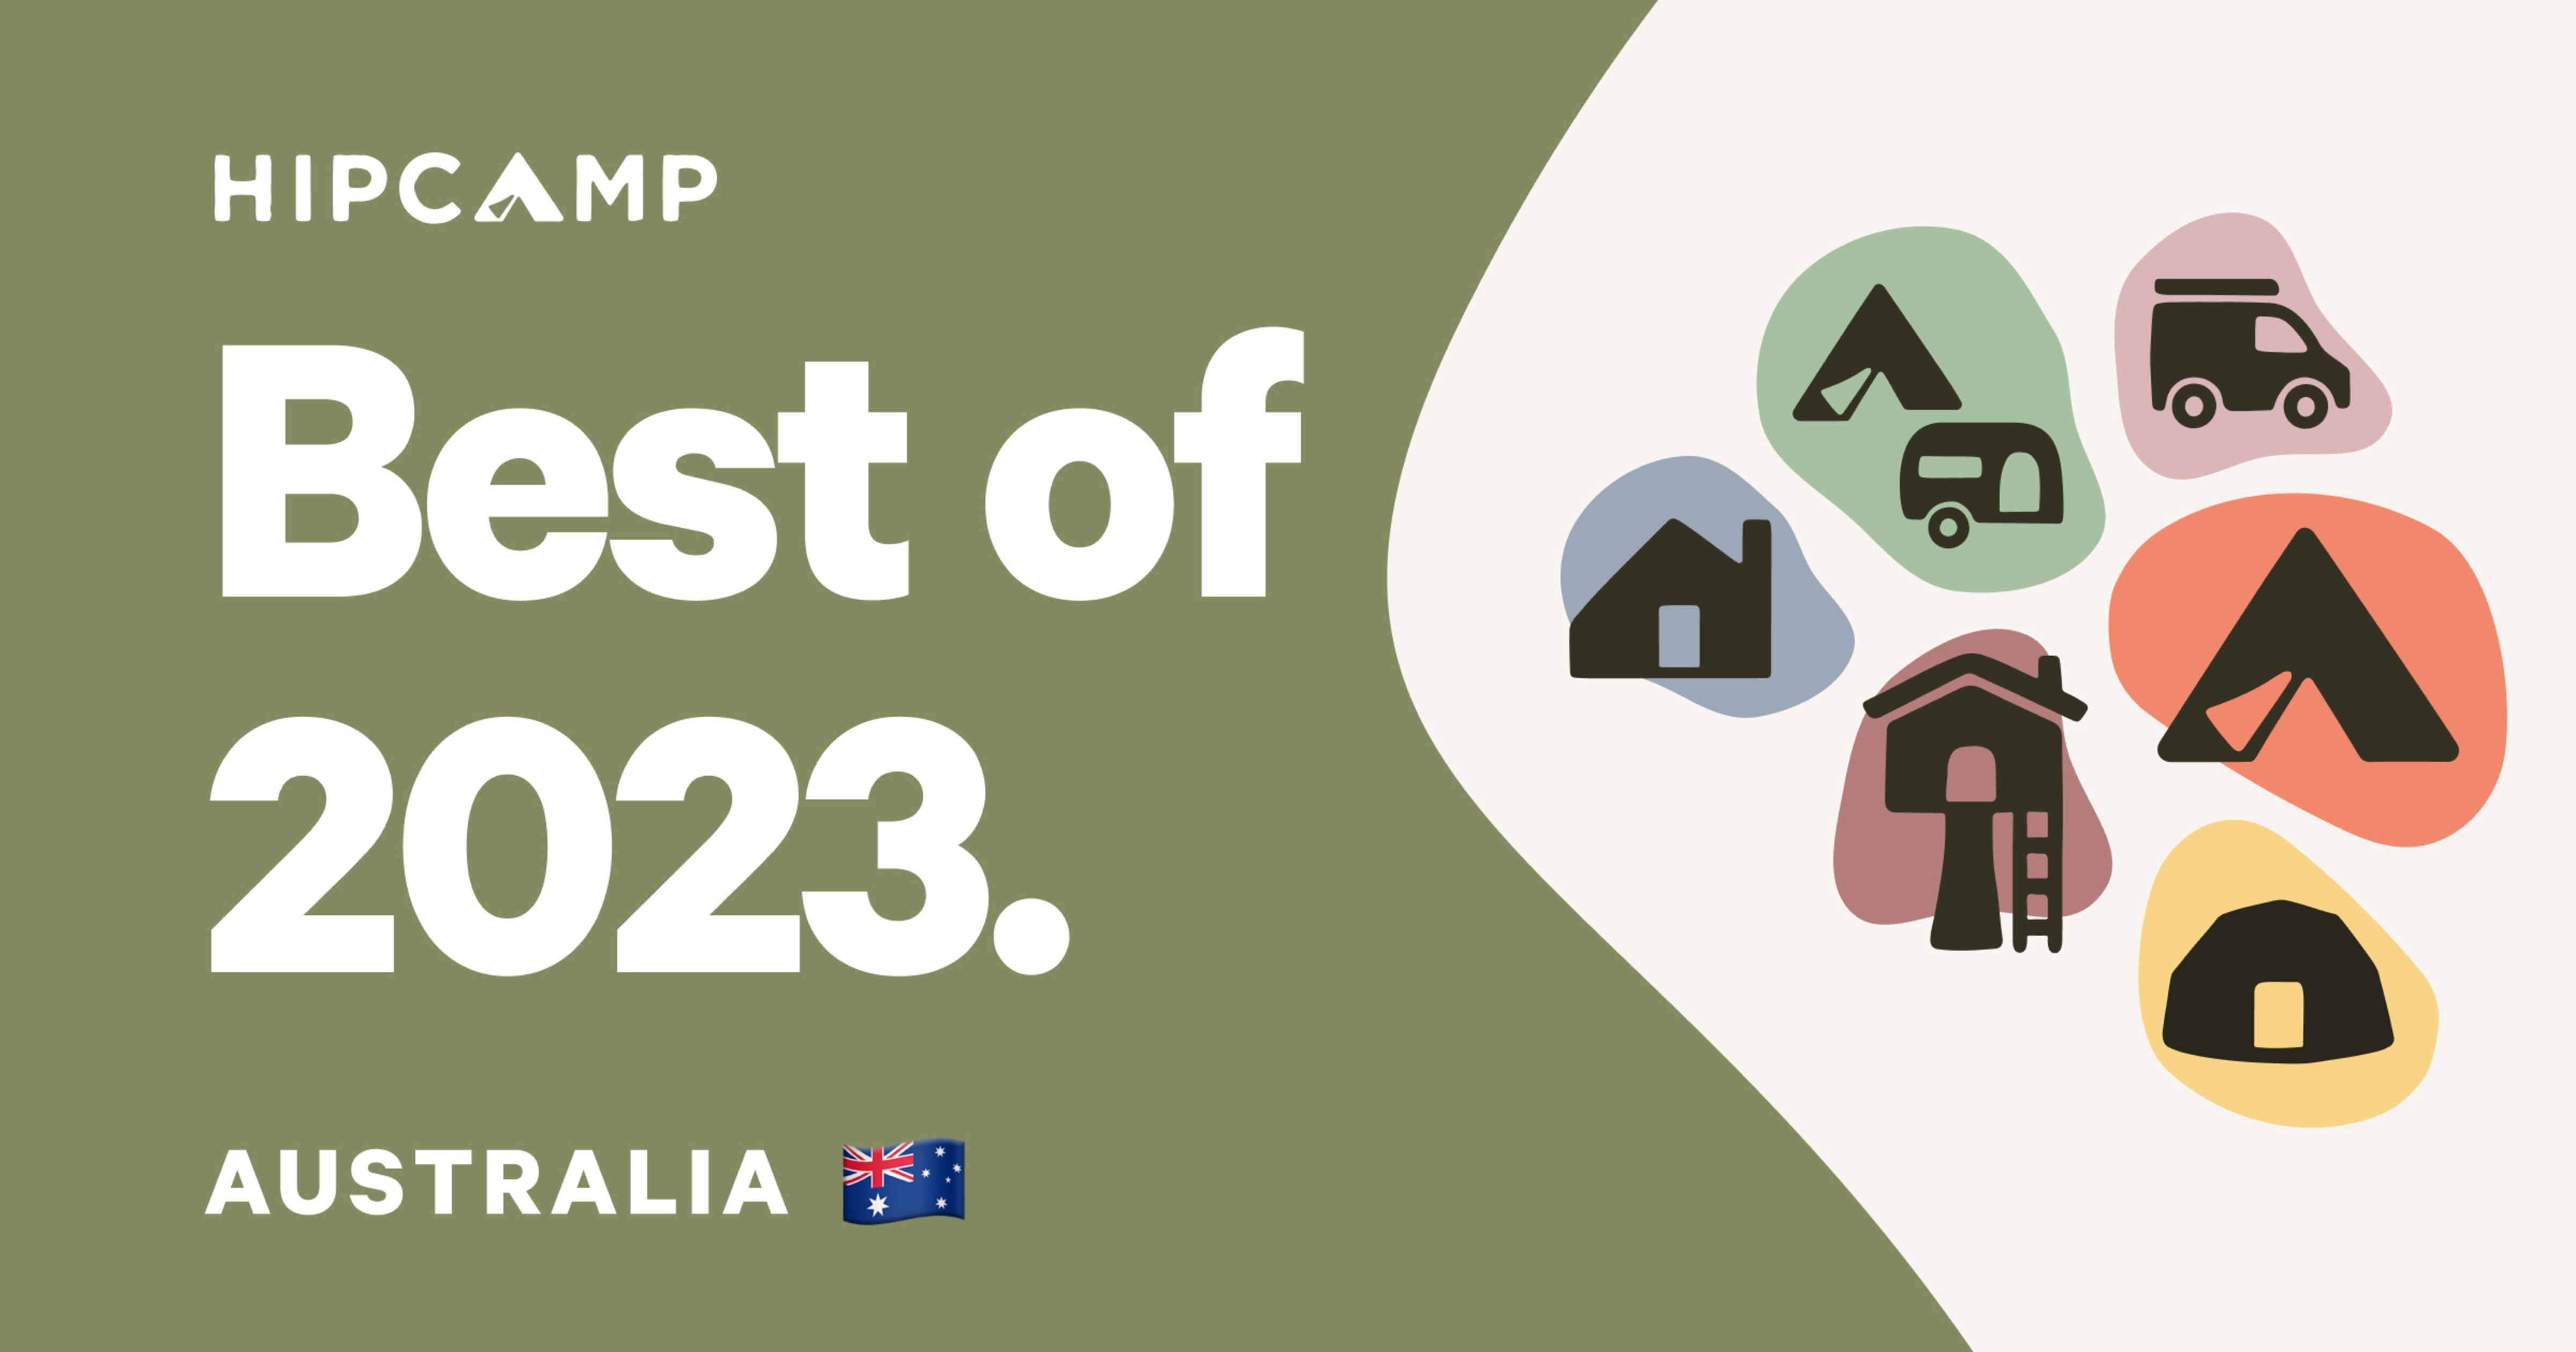 Australia’s Best Hipcamps to Visit in 2023